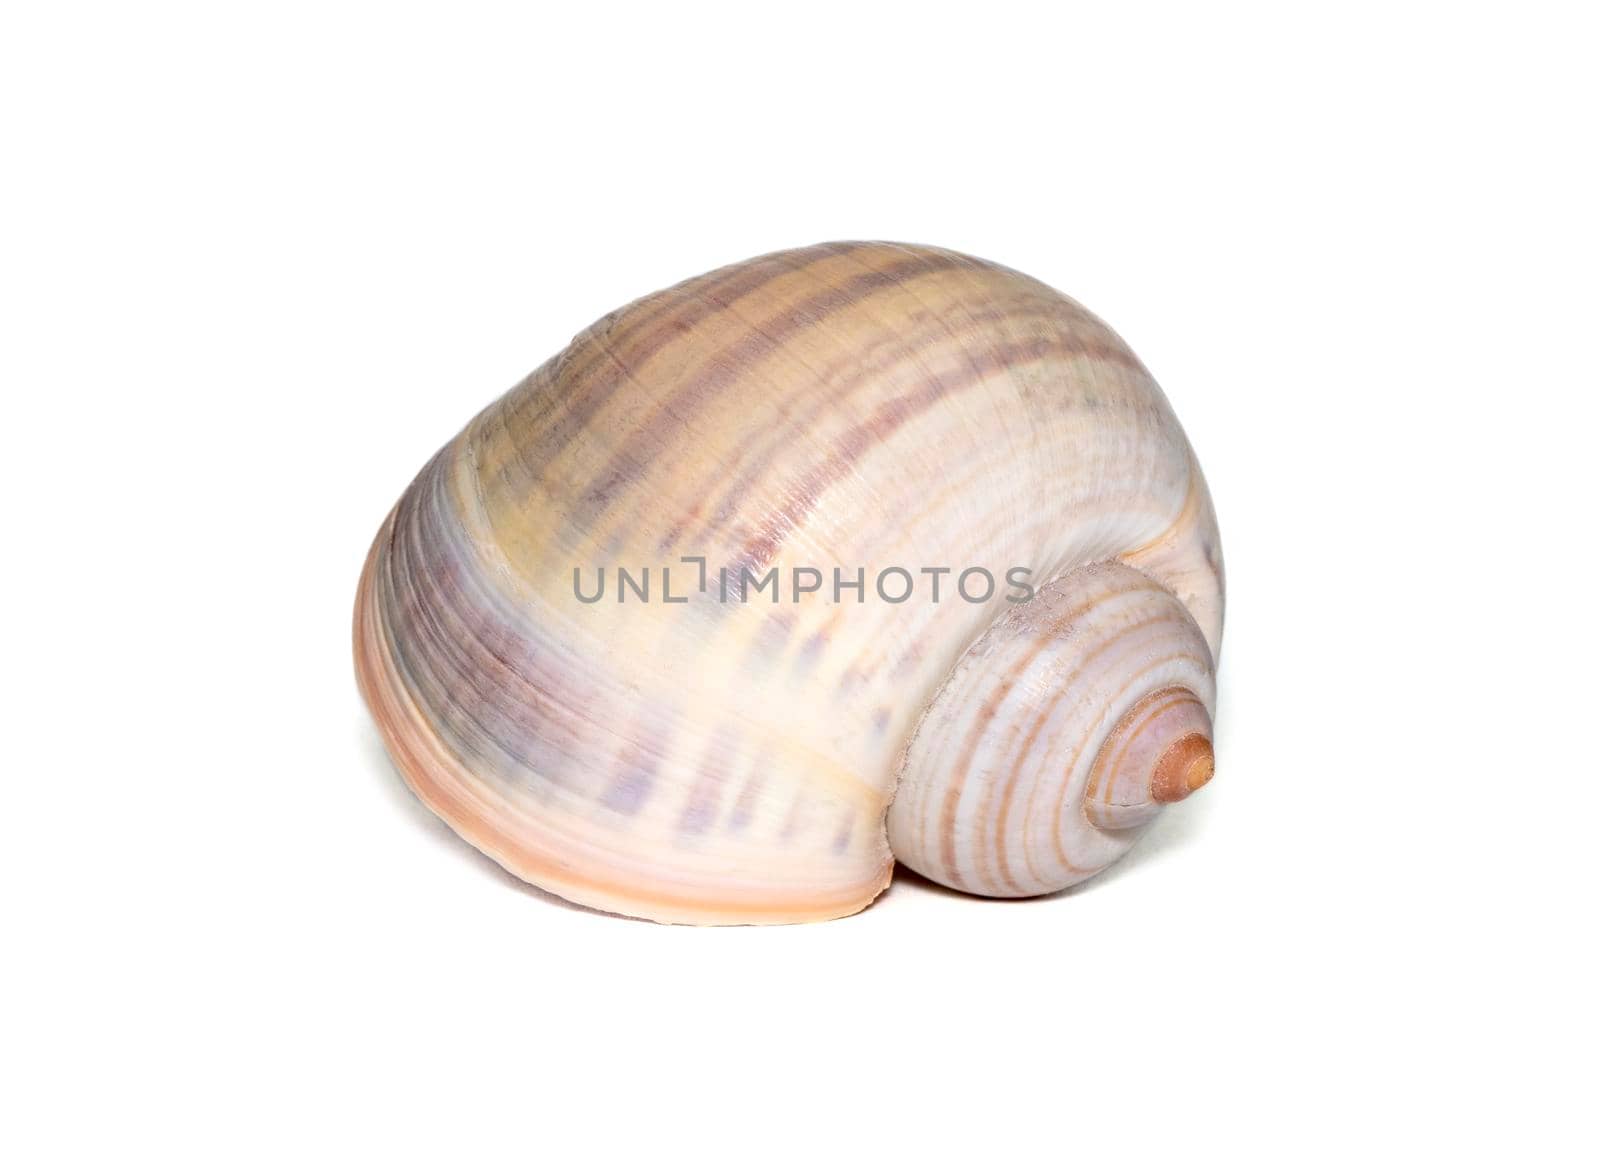 Image of large empty ocean snail shell on a white background. Undersea Animals. Sea shells.